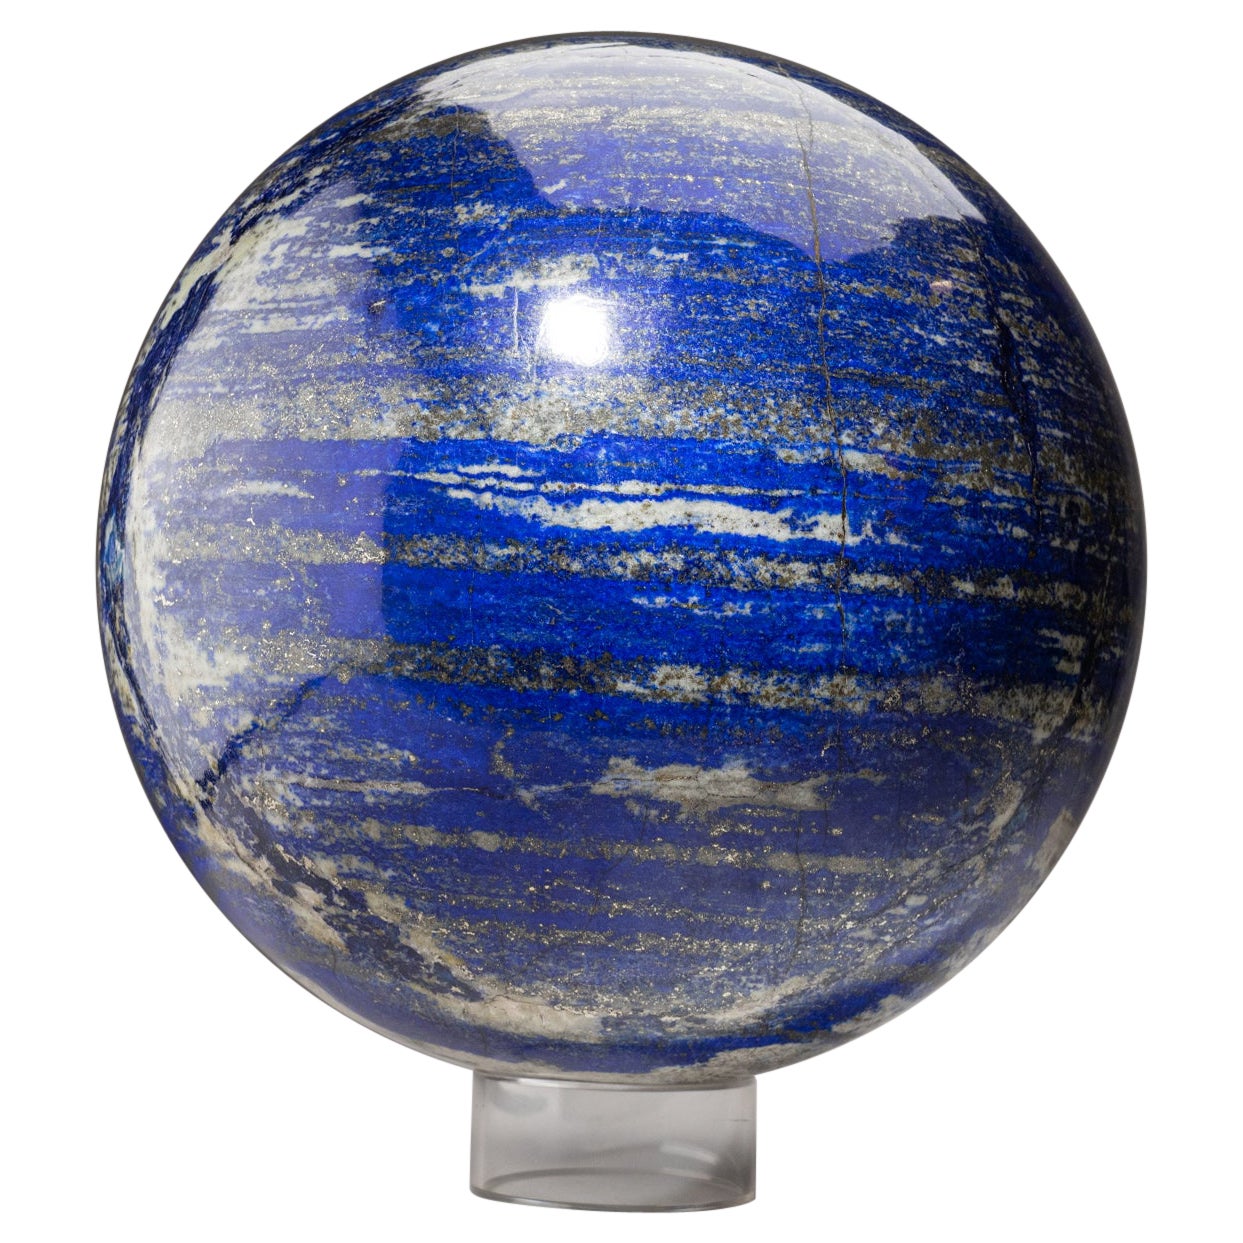 Genuine Polished Lapis Lazuli Sphere from Afghanistan (12", 77.5 lbs) For Sale